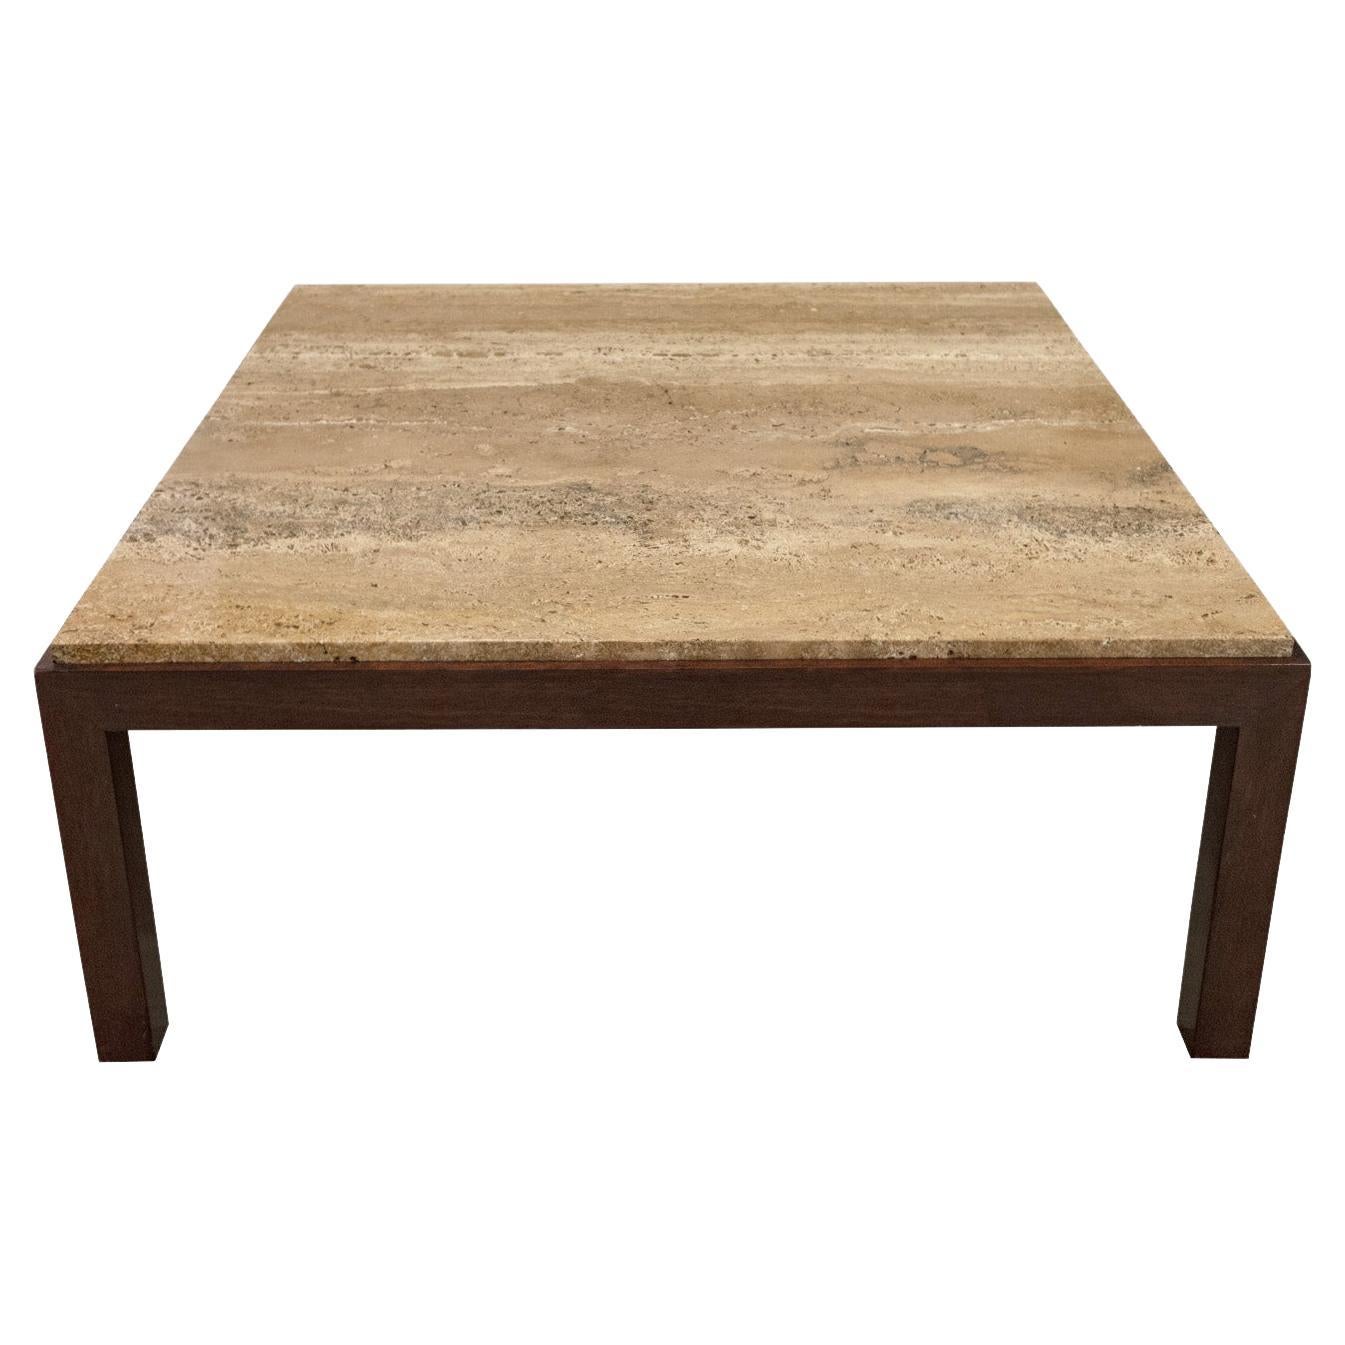 Edward Wormley Coffee Table with Italian Travertine Top 1952 'Signed' For Sale